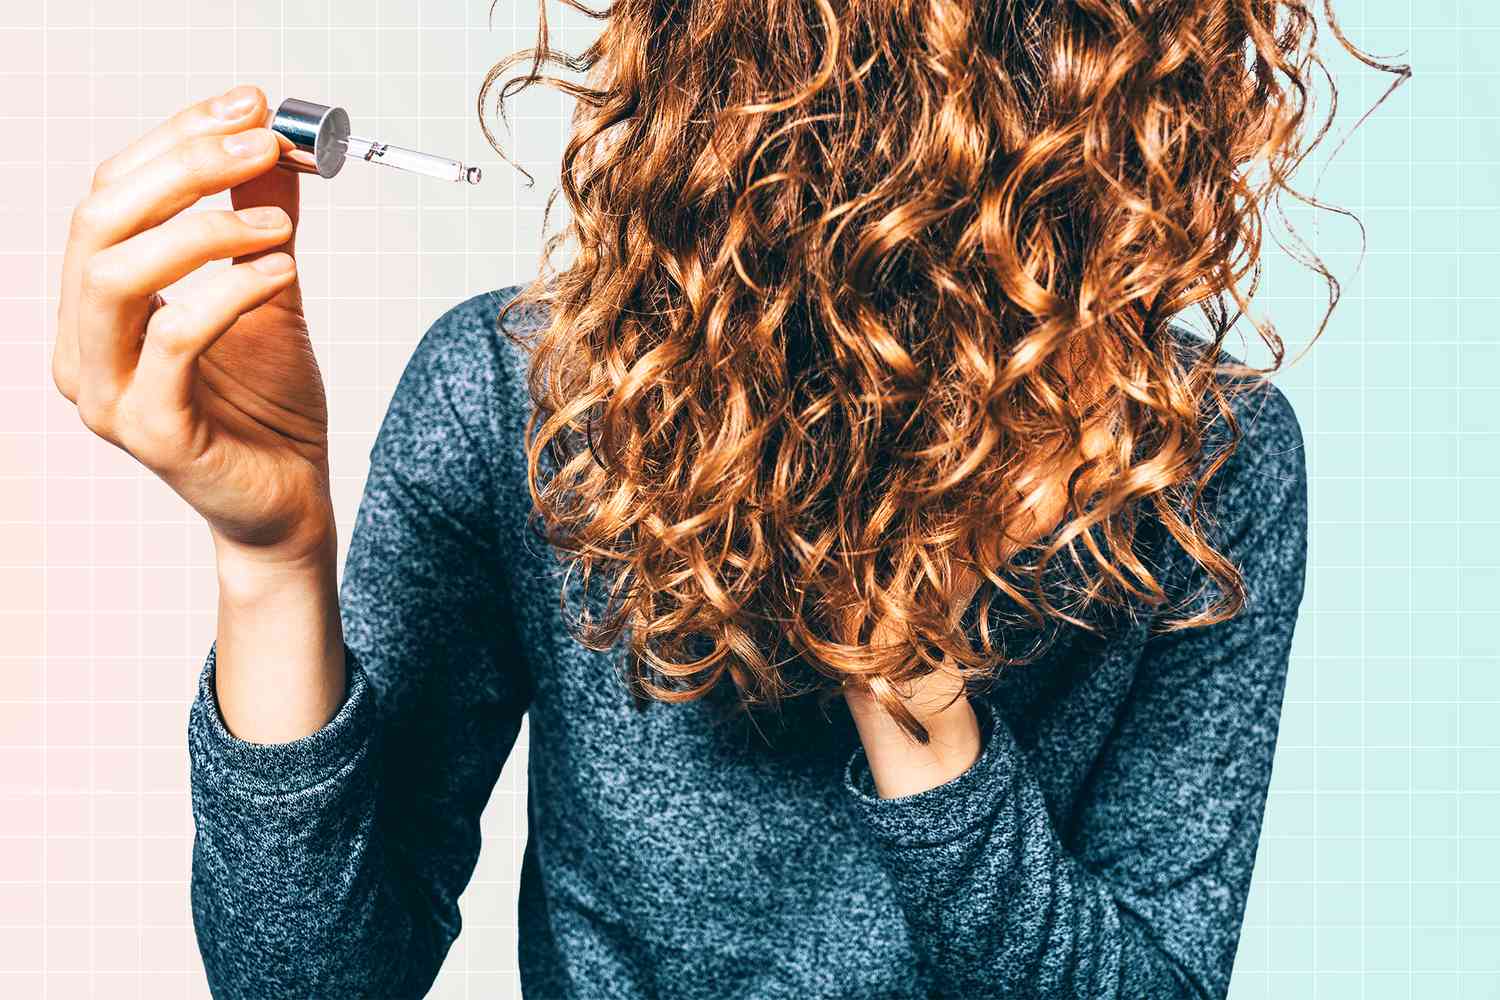 Woman with a oil dropper next to her healthy hair on a designed background